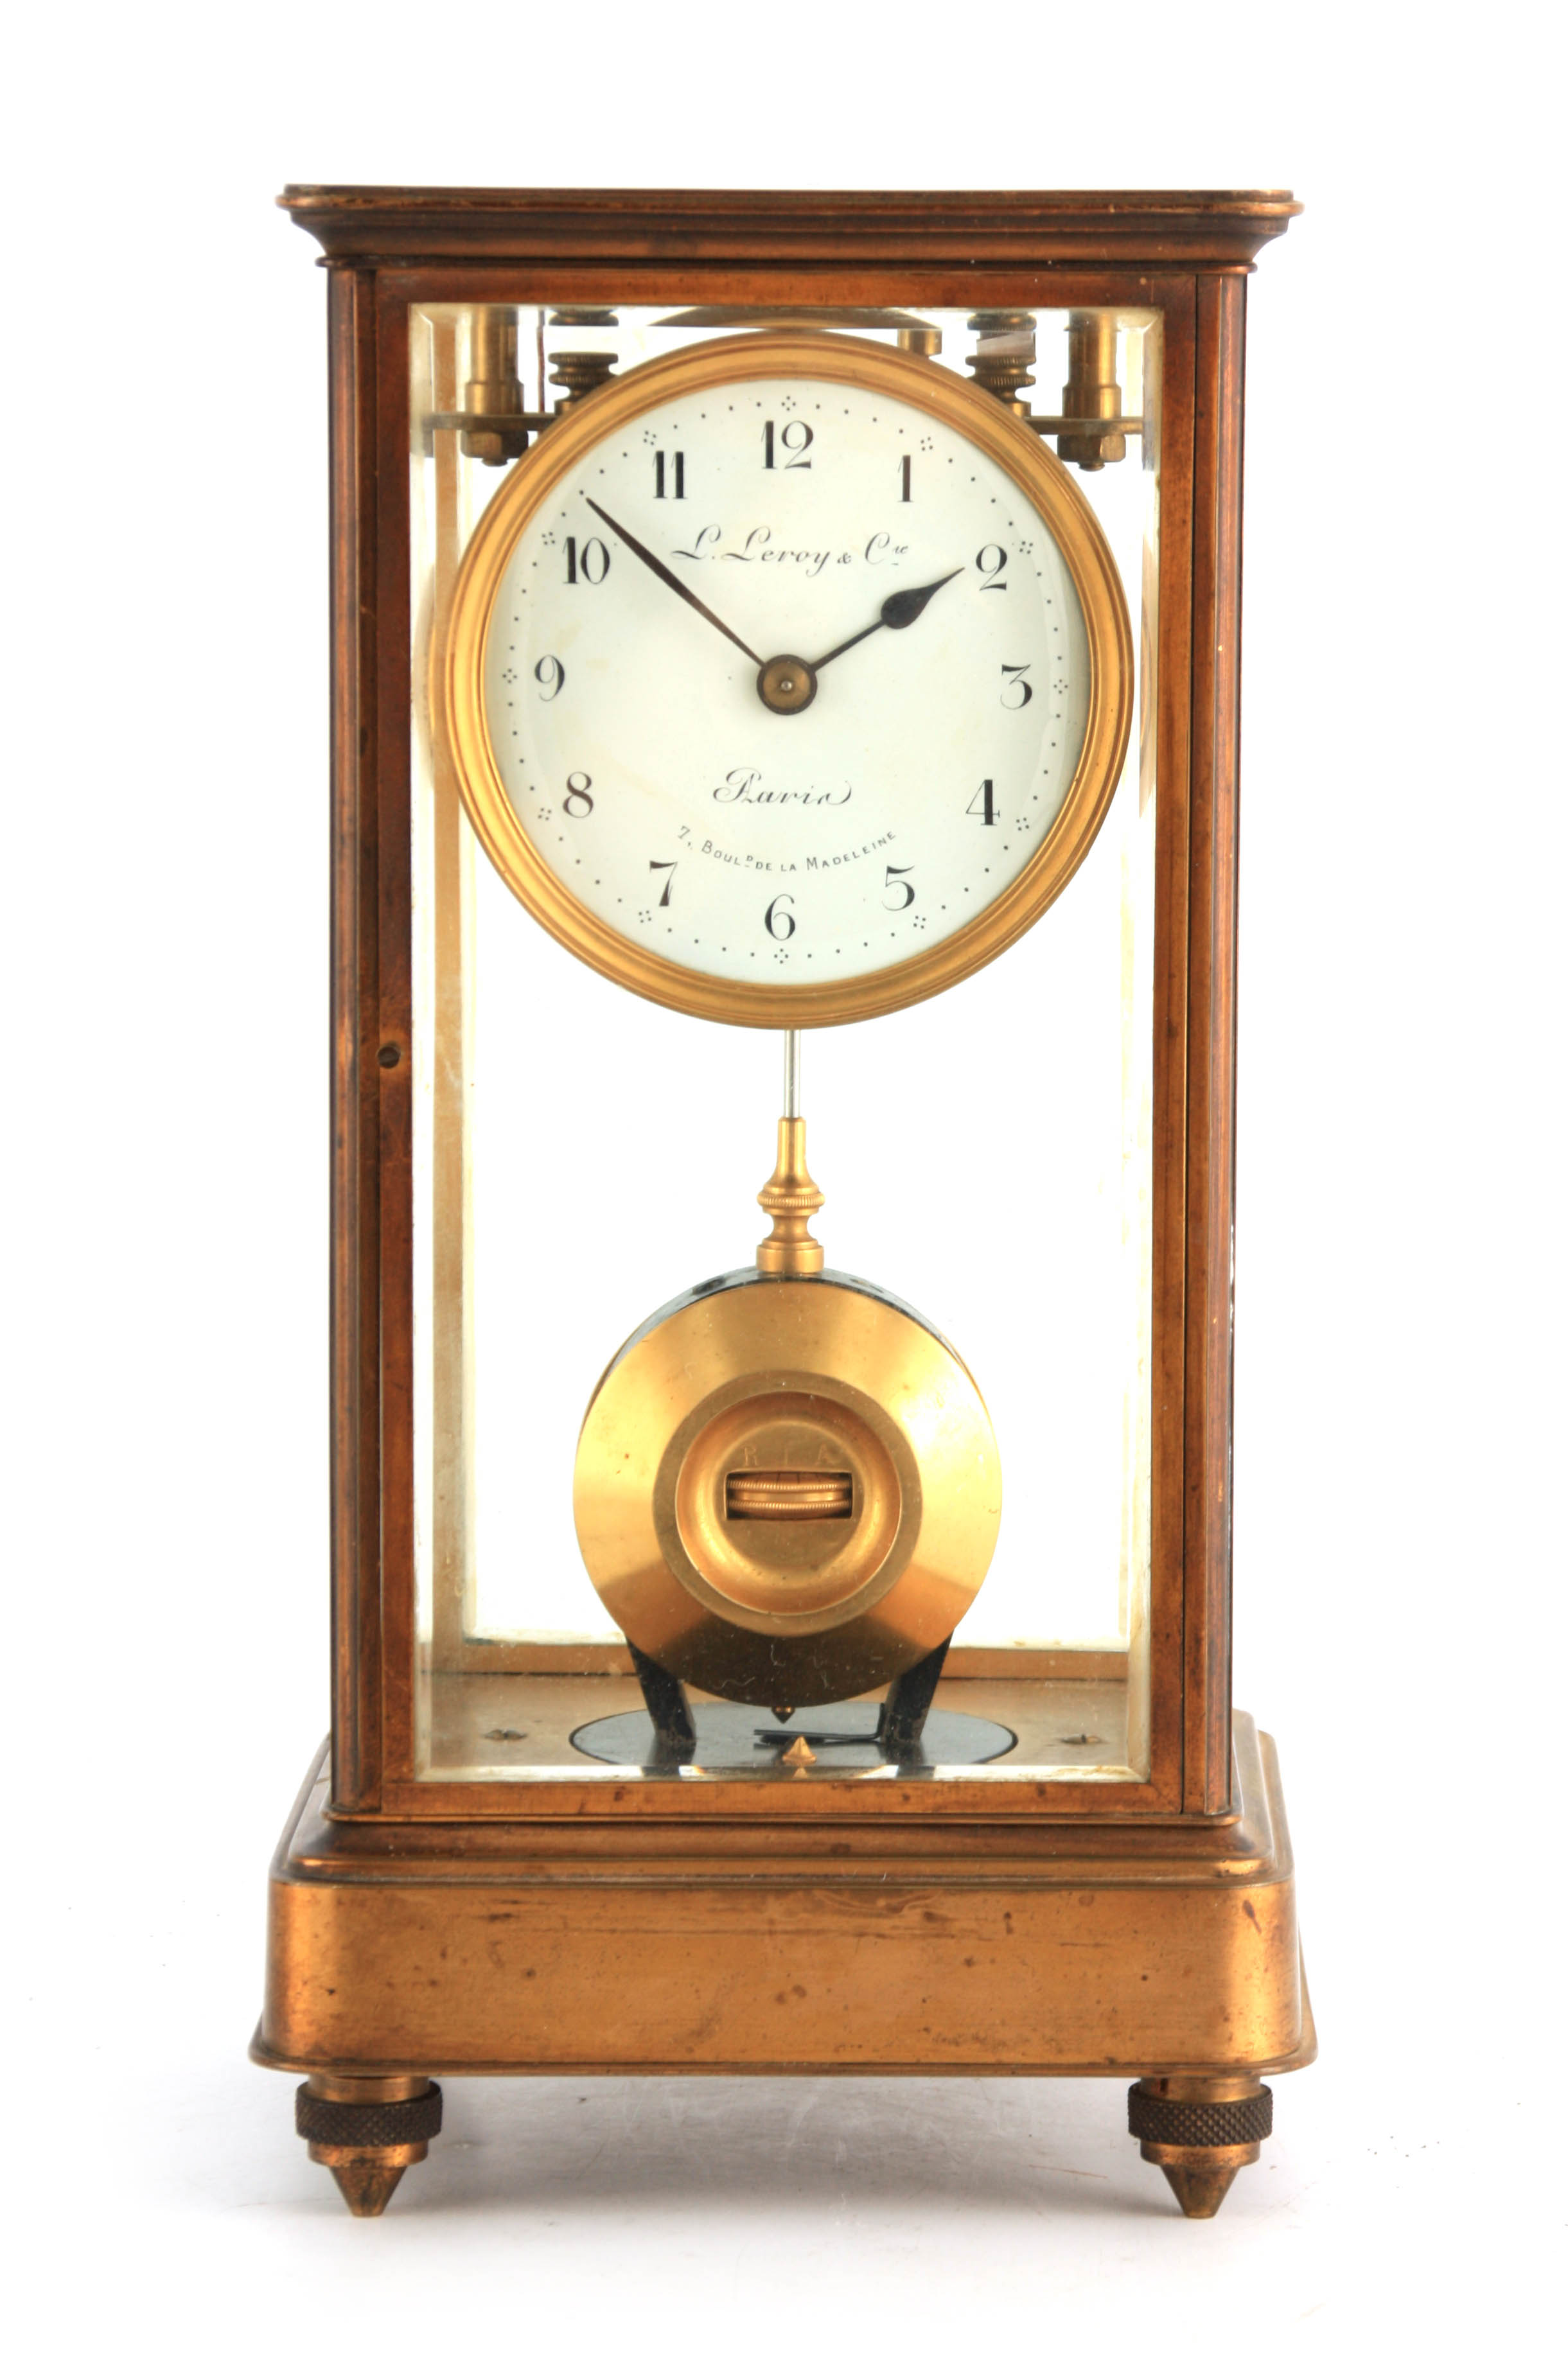 L. LEROY & CO. PARIS A RARE AND GOOD QUALITY EARLY 20TH CENTURY ELECTRIC FOUR-GLASS MANTEL CLOCK the